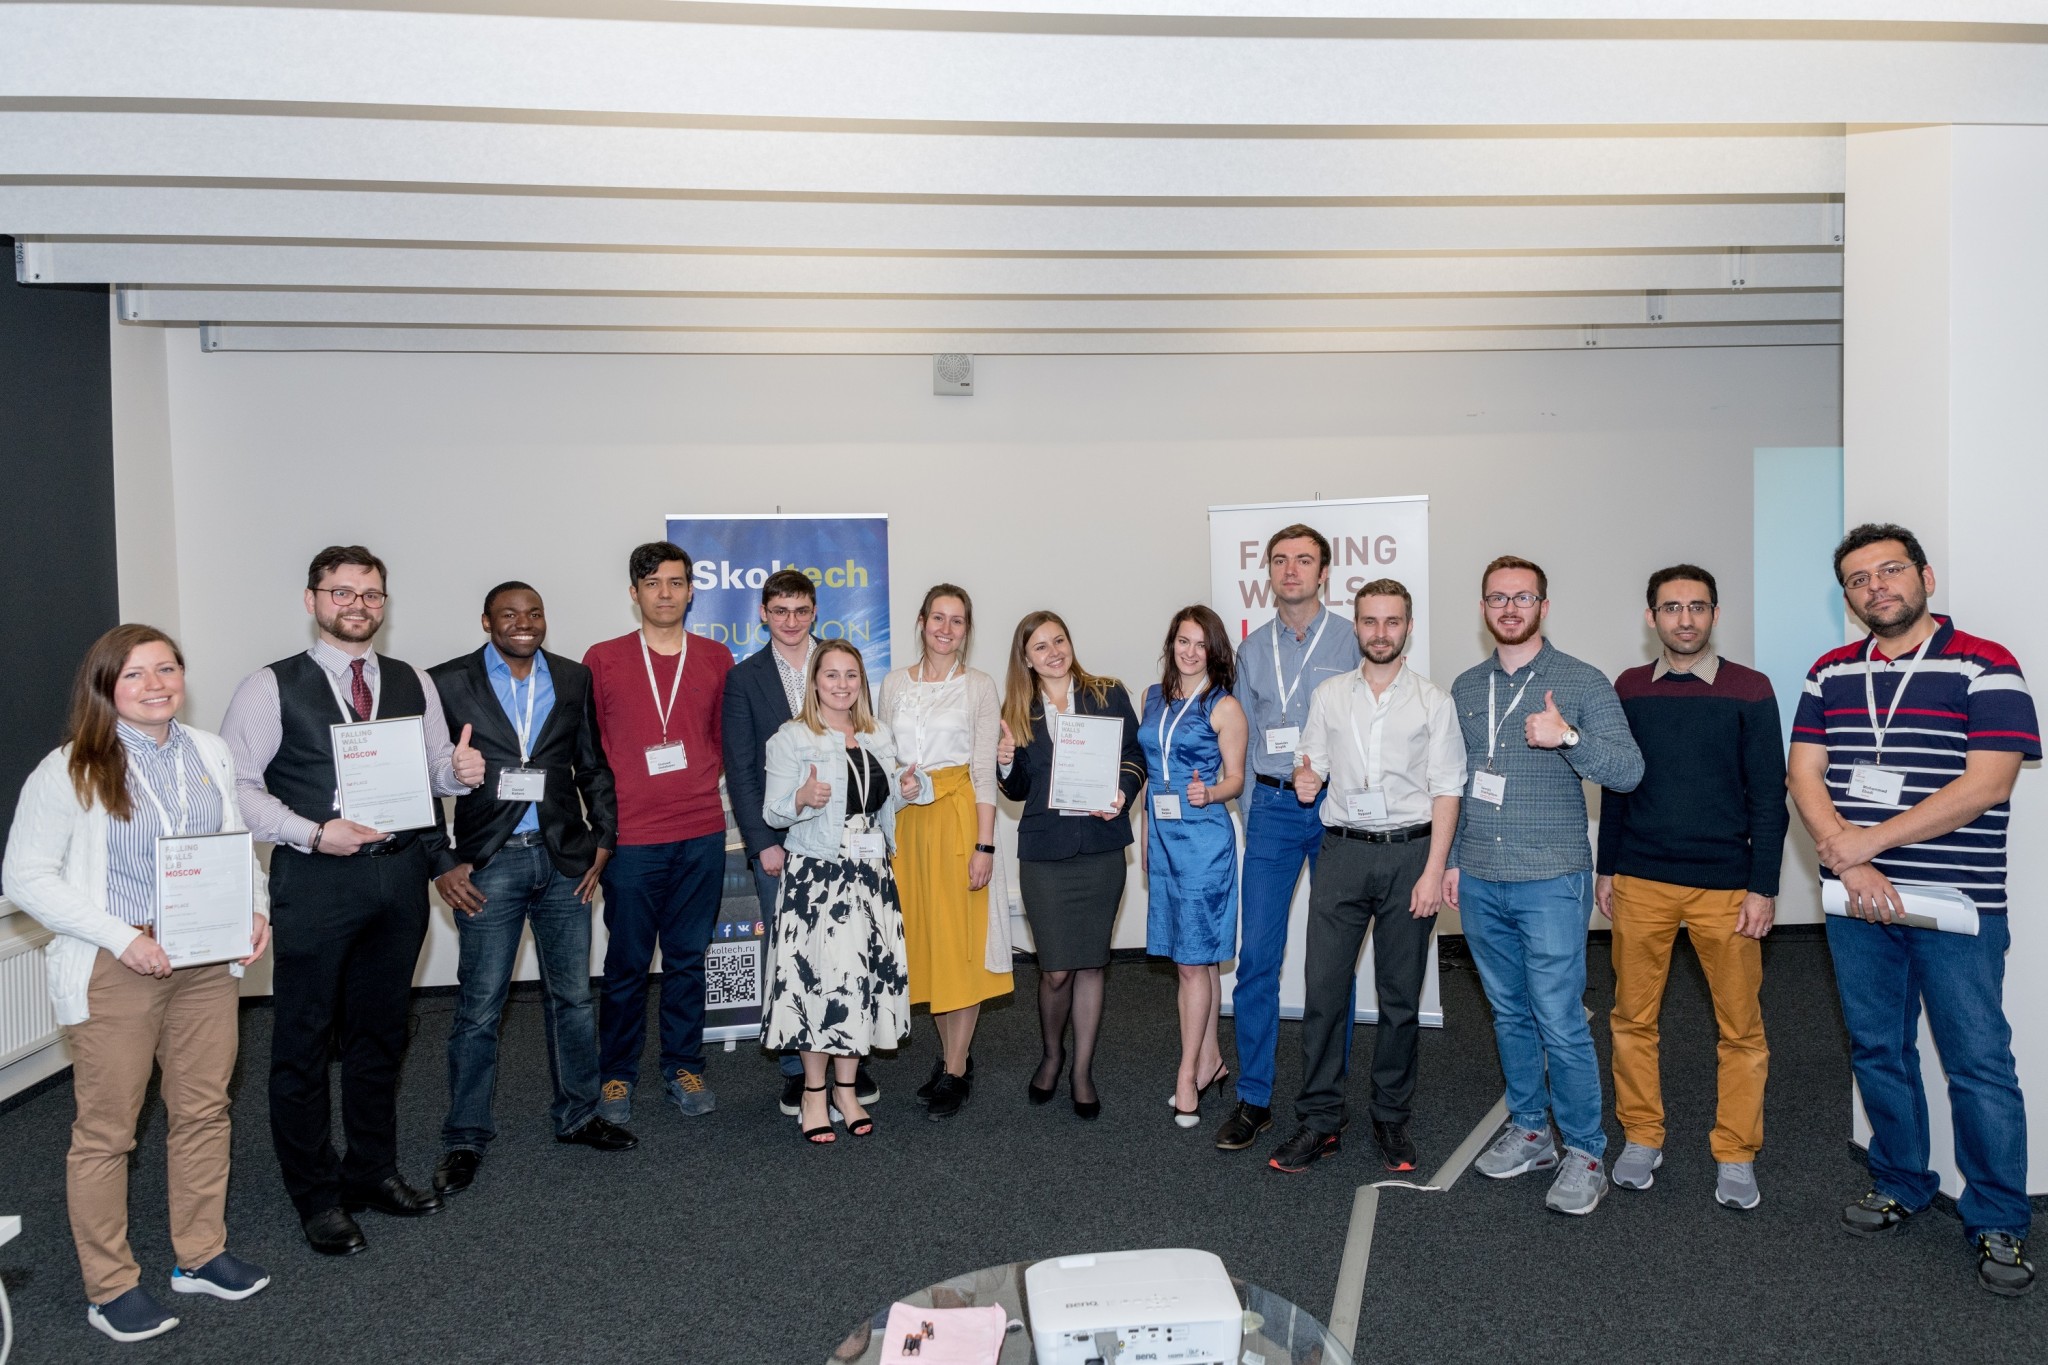 All of the talented competitors following the competition. The three winners are pictured holding their award certificates, including Natalia Glazkova and Dmitry Smirnov (left) and Ksenia Scherbakova (center). Photo: Skoltech.